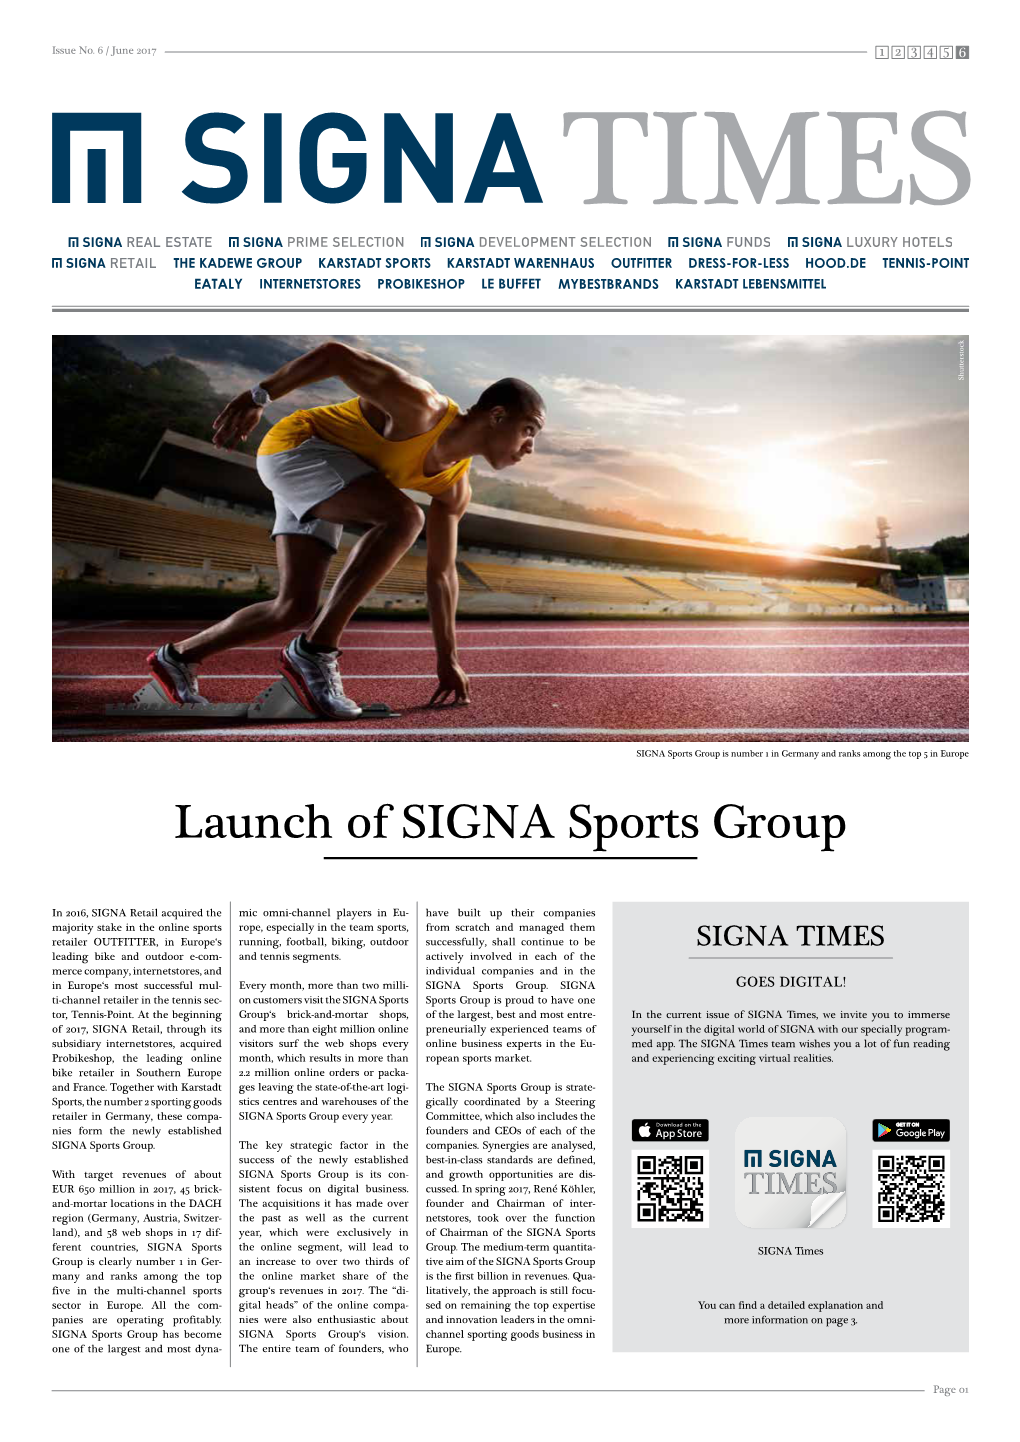 Launch of SIGNA Sports Group